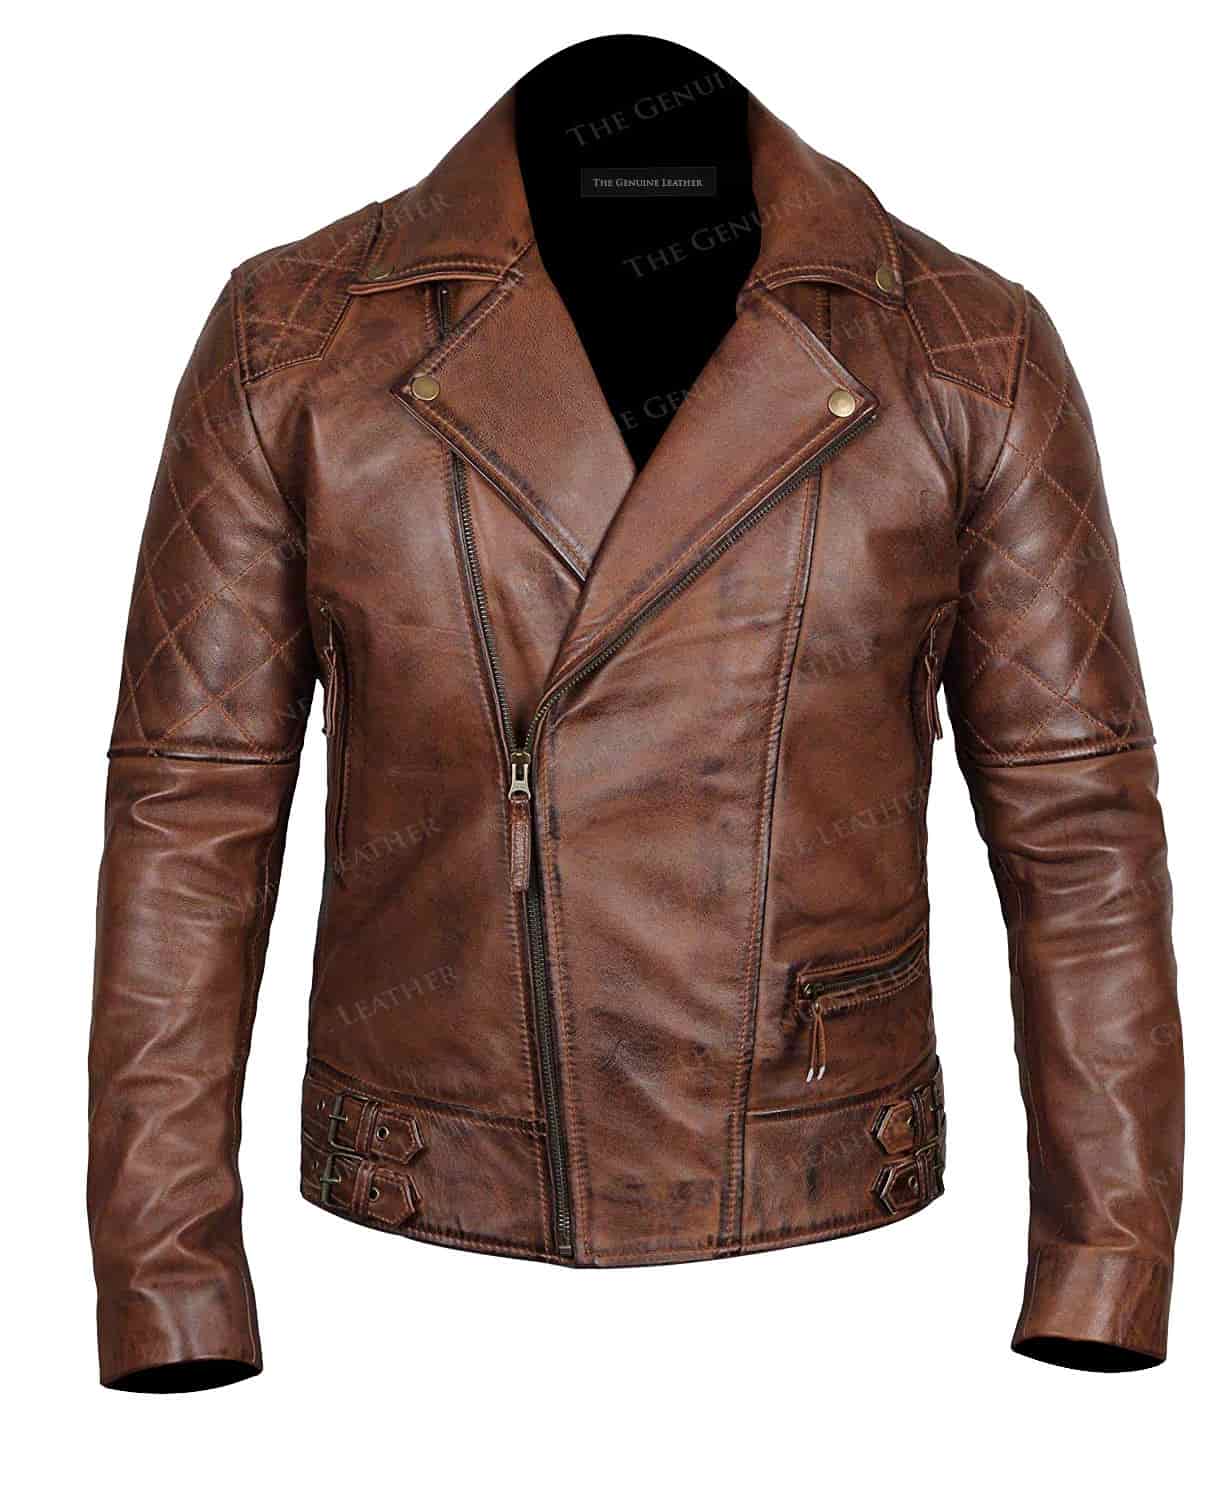 Theo&Ash - Buy leather jackets online for Men | Designer leather jackets  for men in India | Custom made leather jackets online